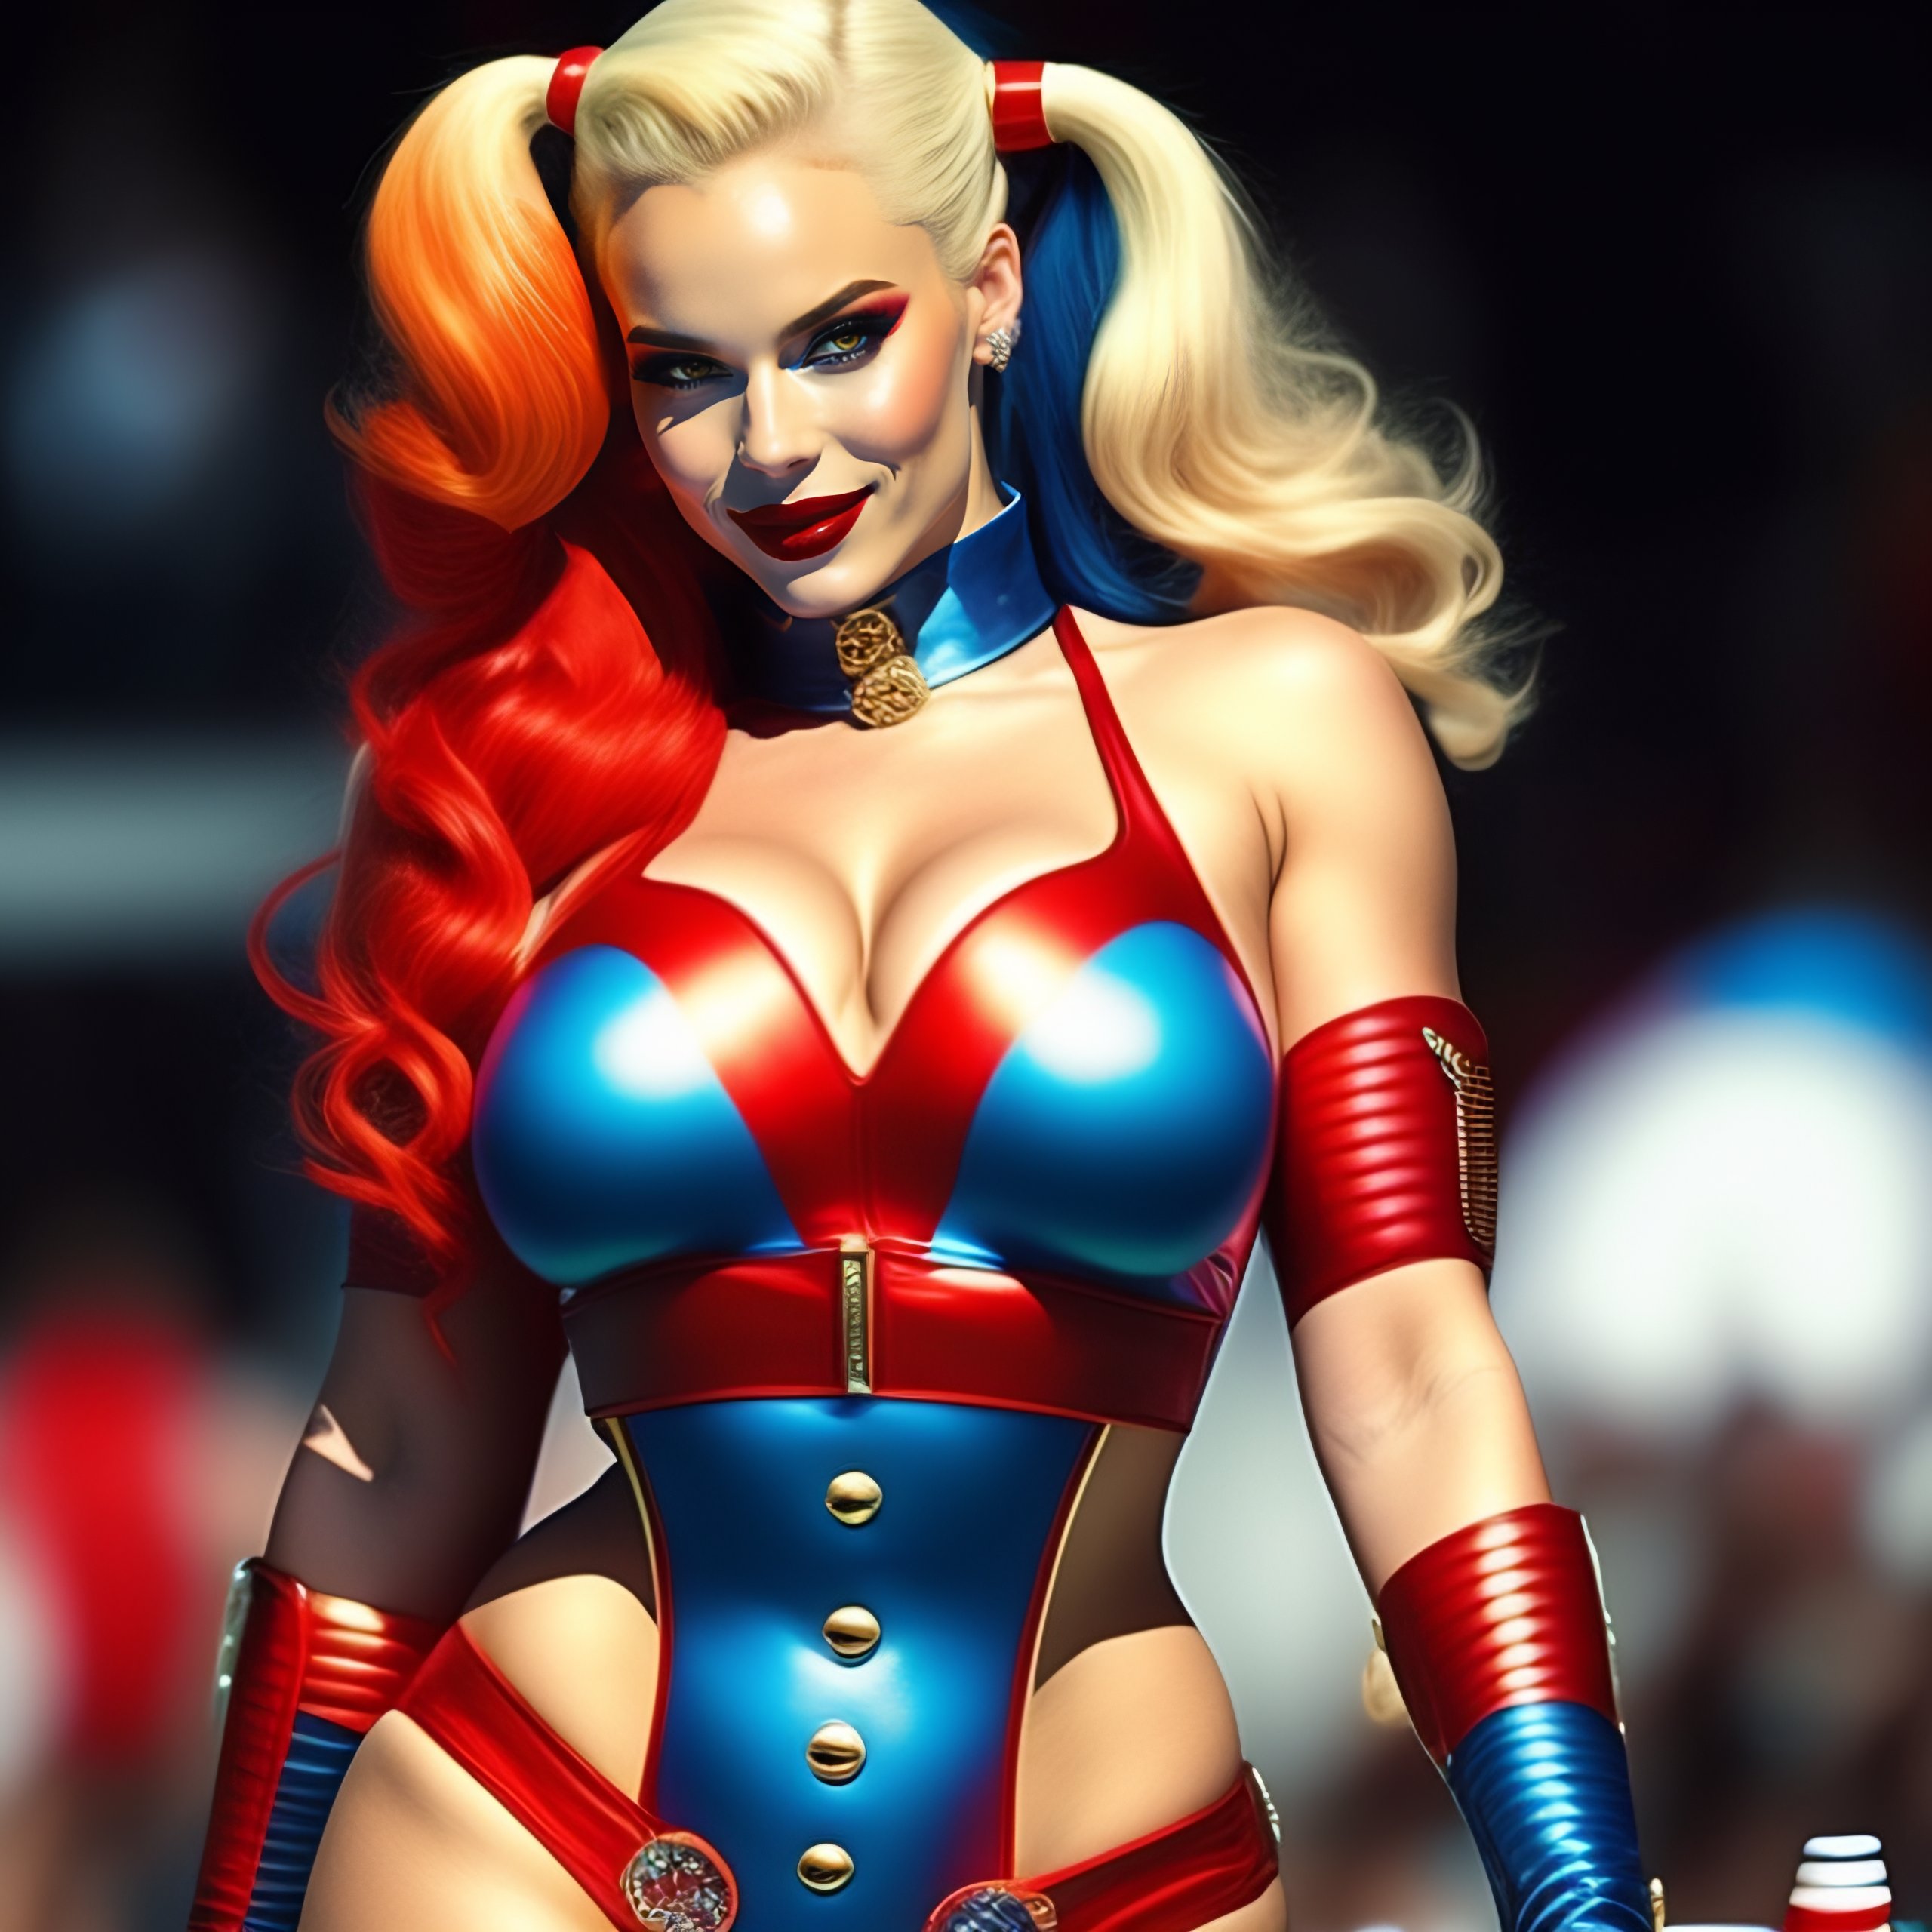 ben deming recommends Hot Harley Quinn Images